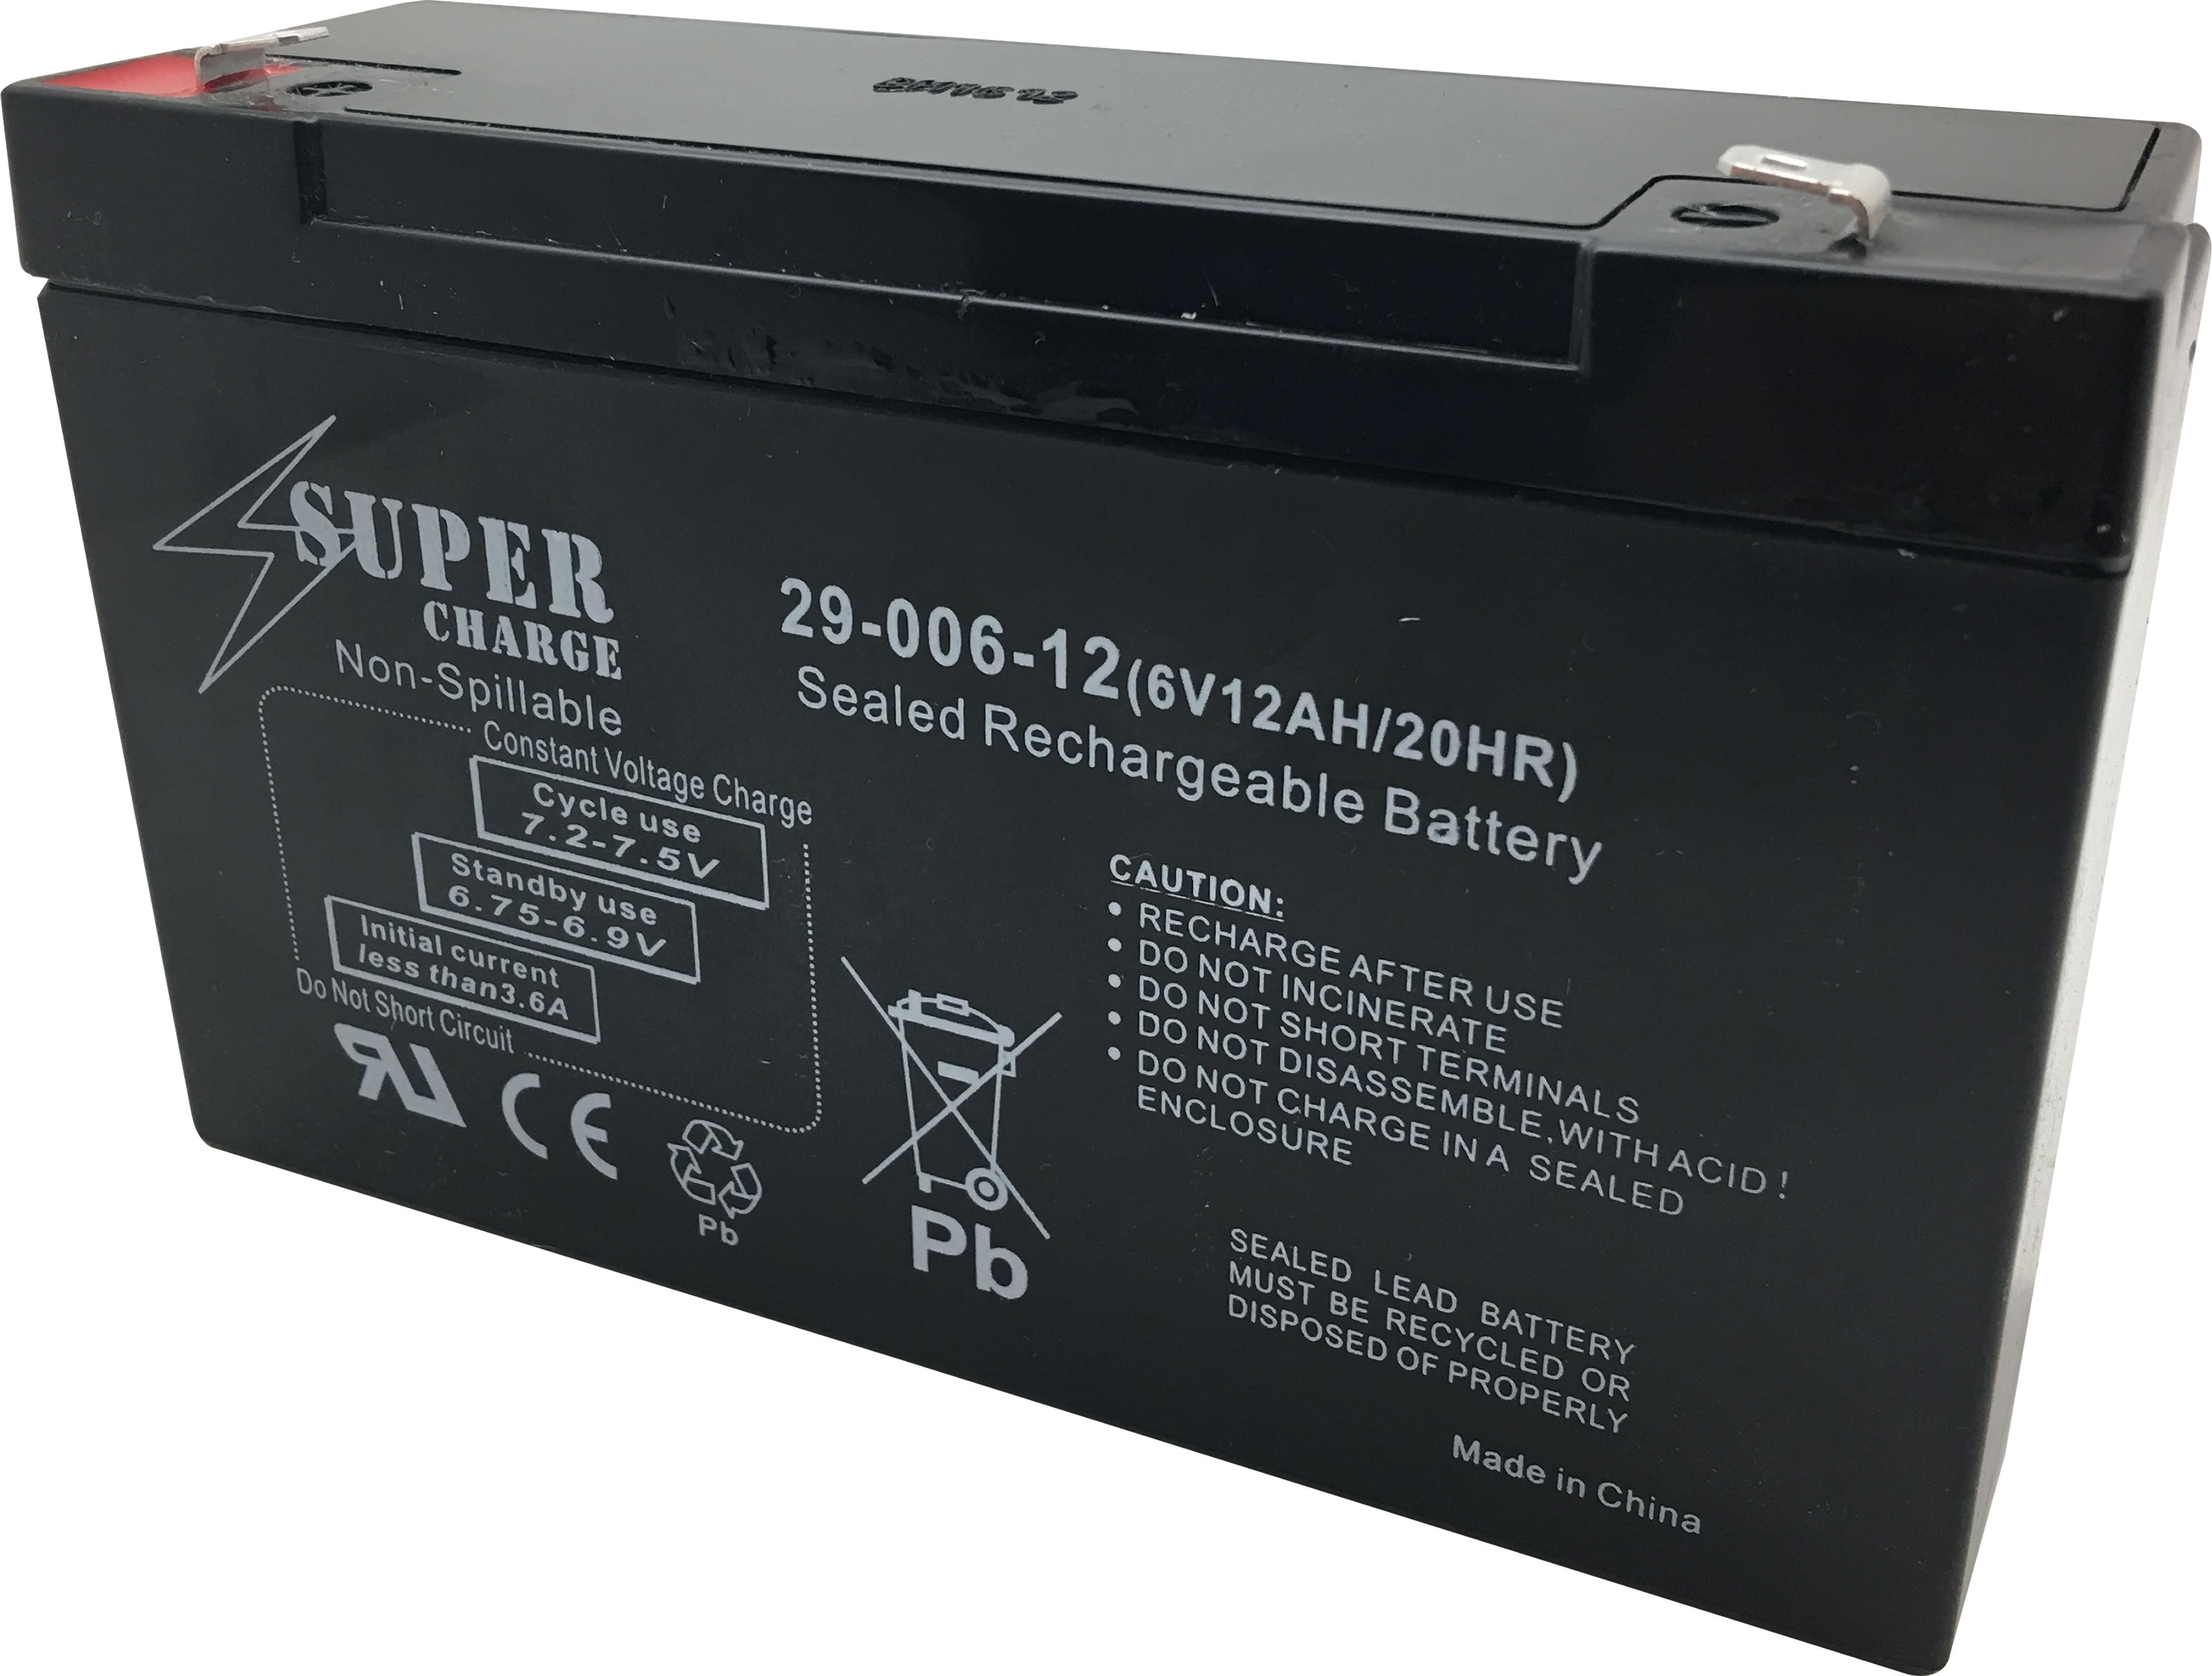 29-006-12 Rechargeable Battery 6V 12AH 20HR